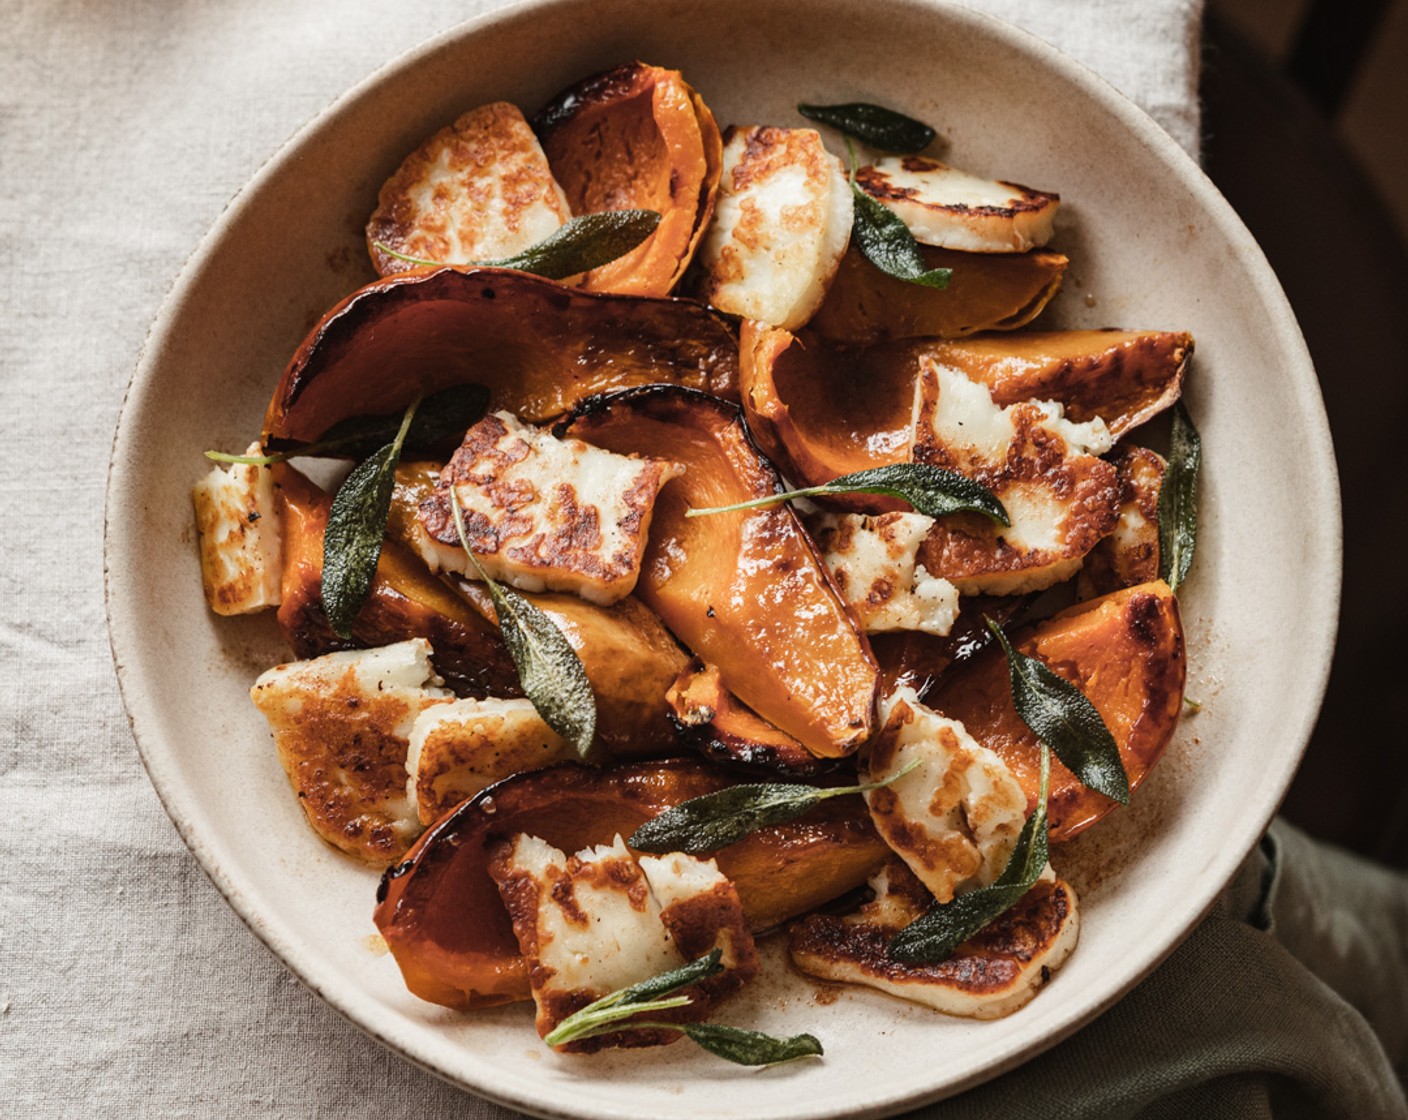 step 7 Cut your honey nut squash into smaller pieces. Plate the honeynut squash along with the fried halloumi, torn in half if desired. Finally, drizzle the browned butter all over the squash and halloumi and garnish with the crispy sage leaves. Enjoy!